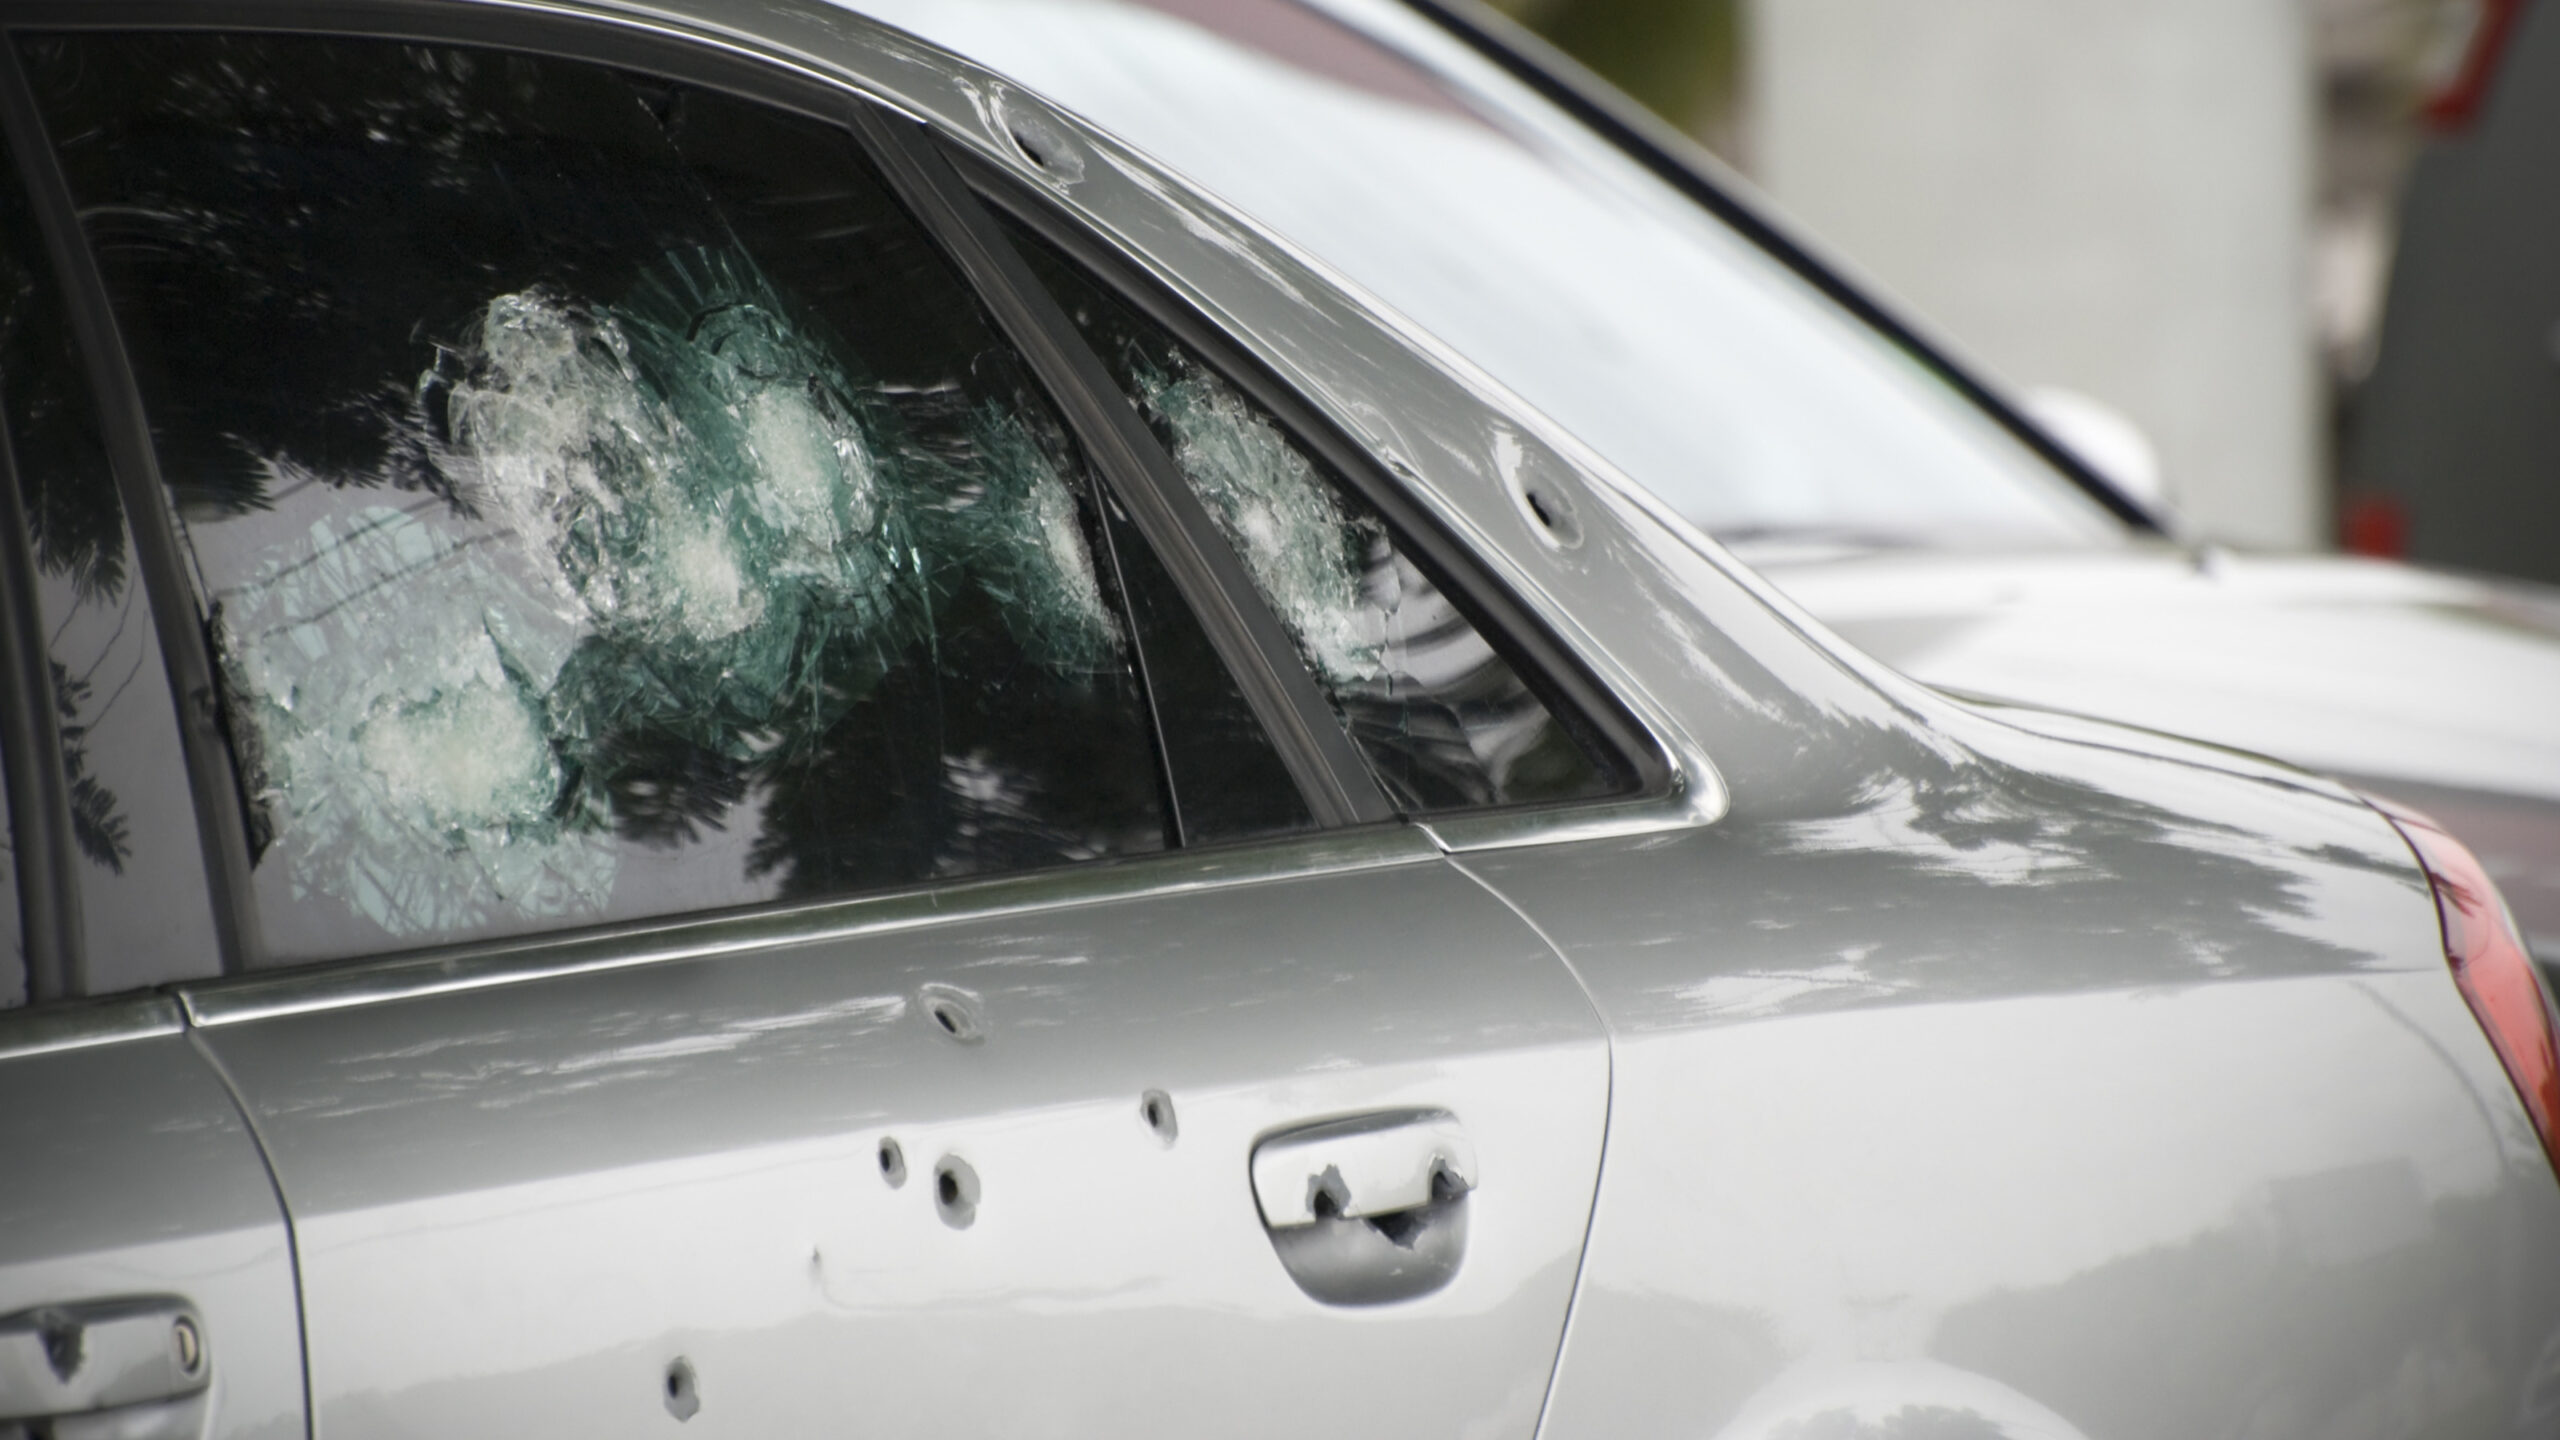 Americans In High-Crime Cities Are Having Their Cars Bulletproofed, Says Armorer